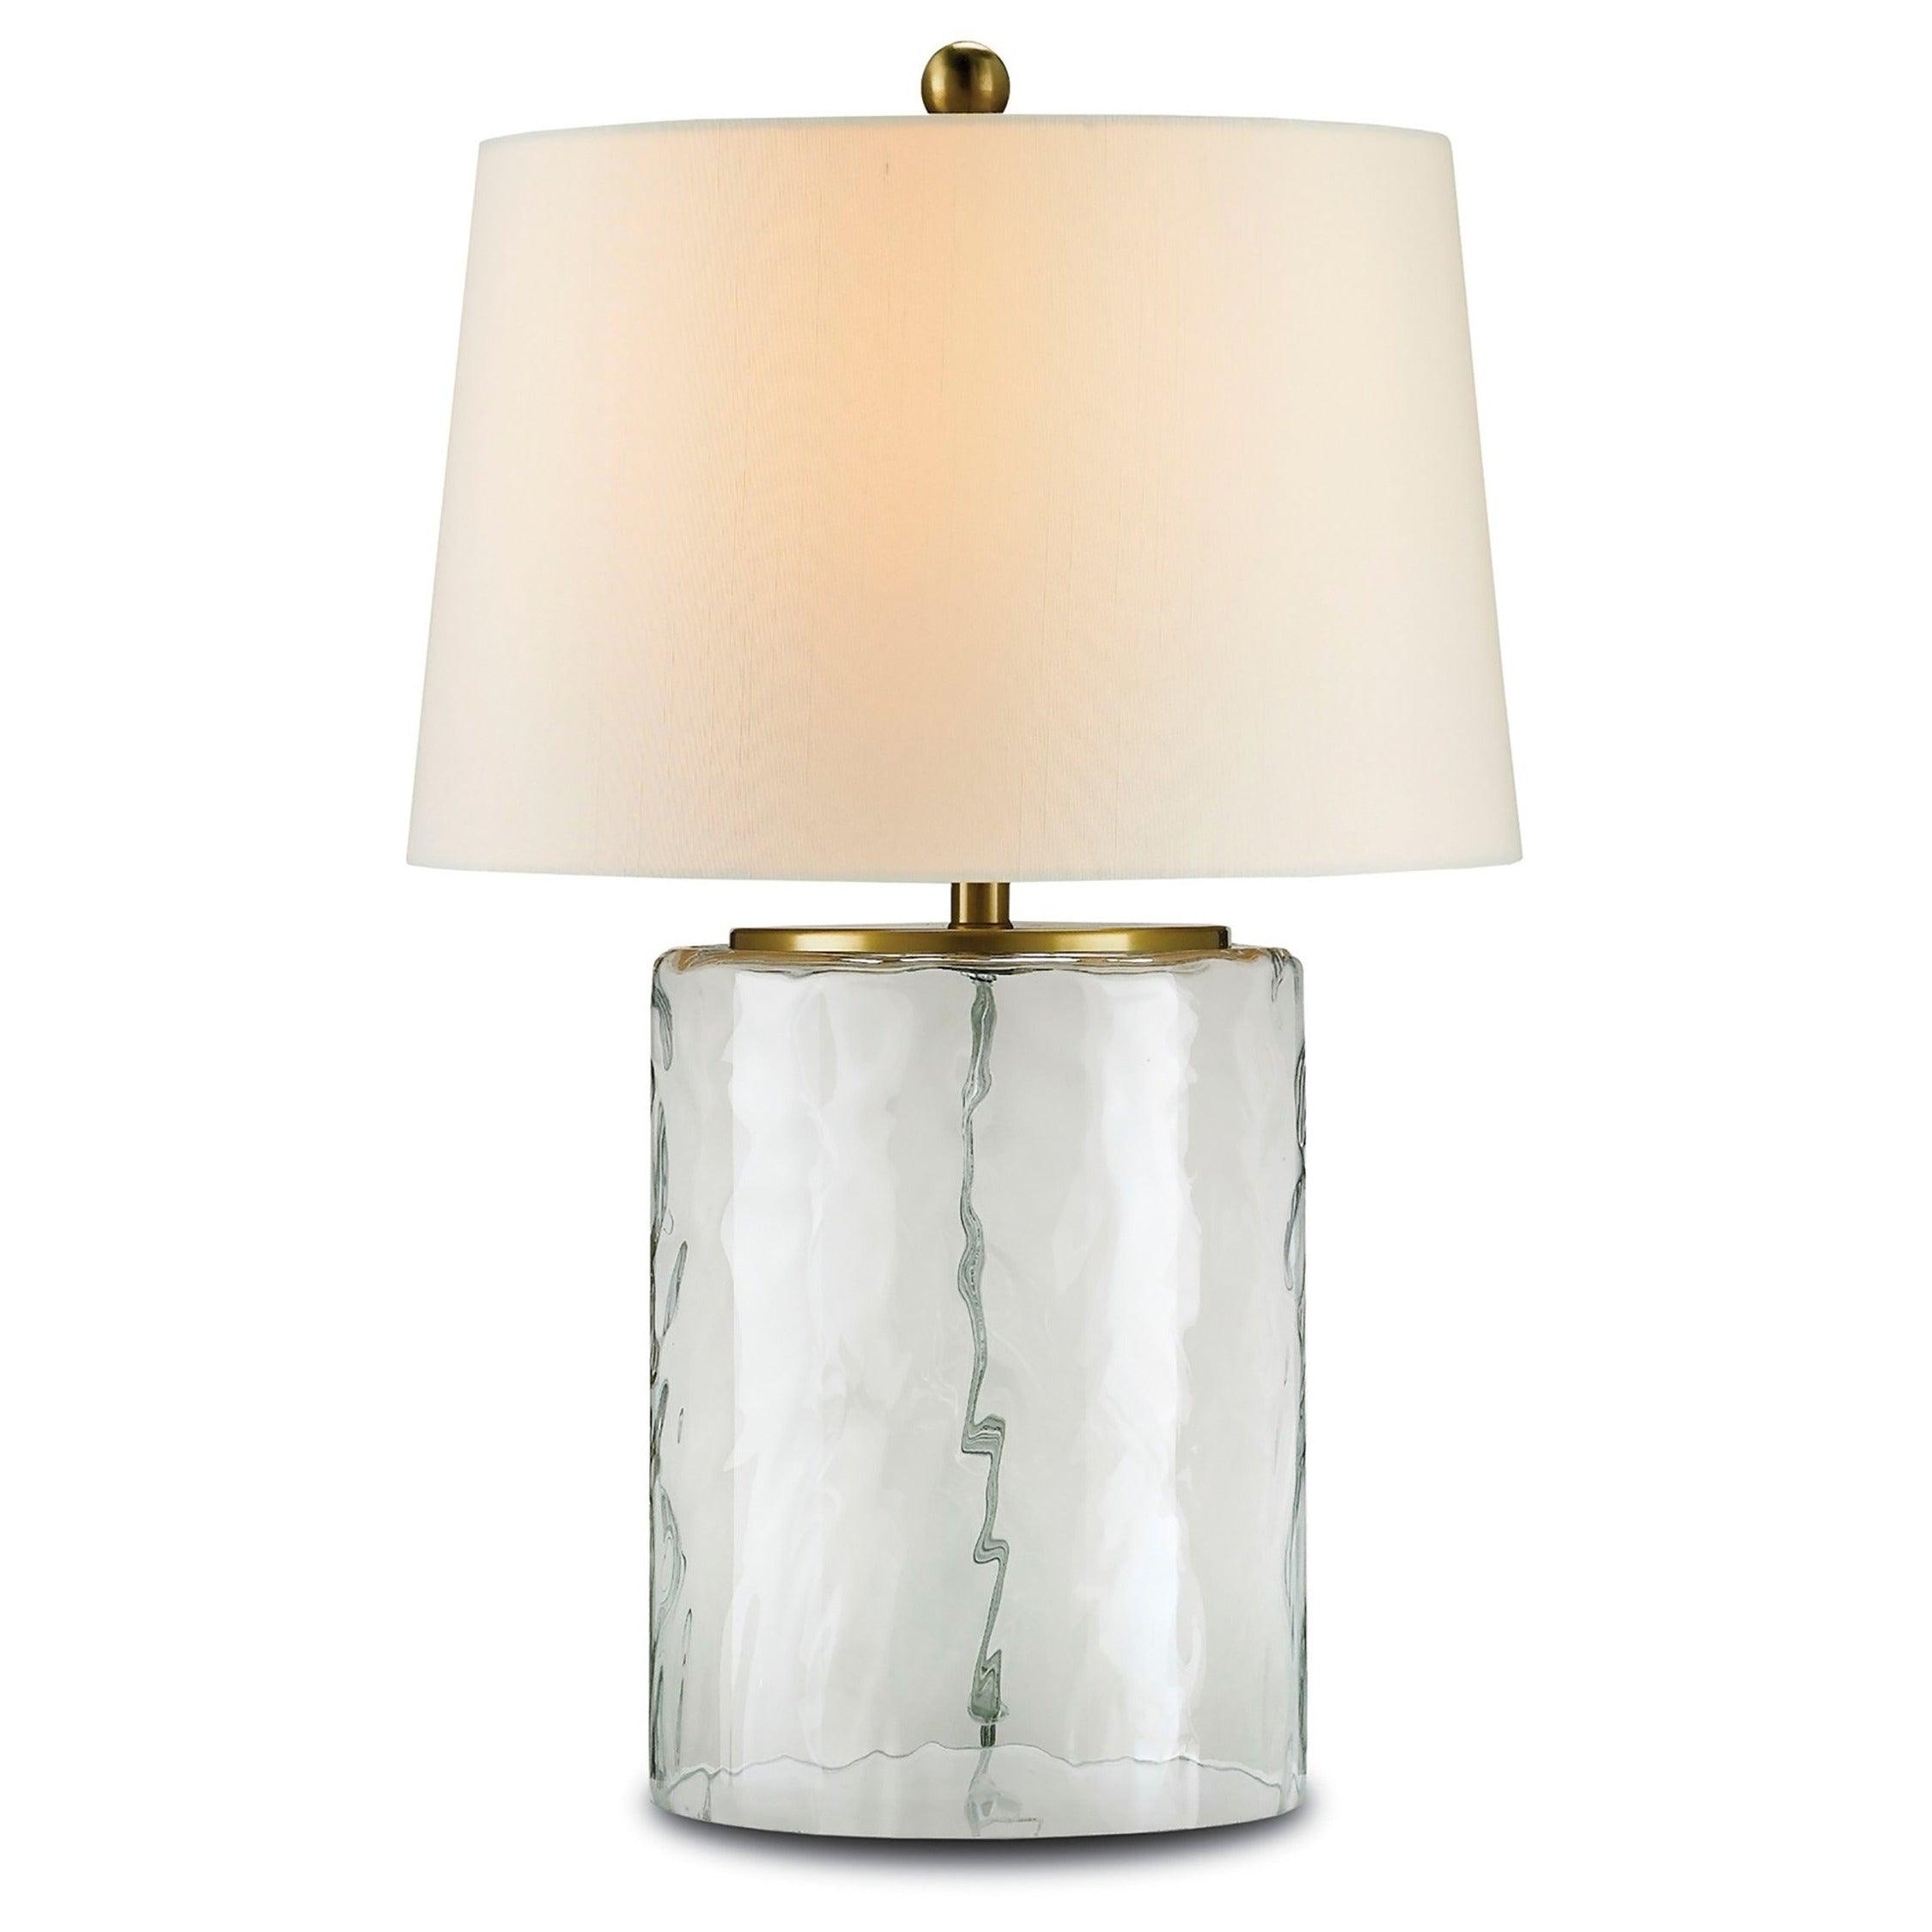 Currey and Company - Oscar Table Lamp - 6197 | Montreal Lighting & Hardware